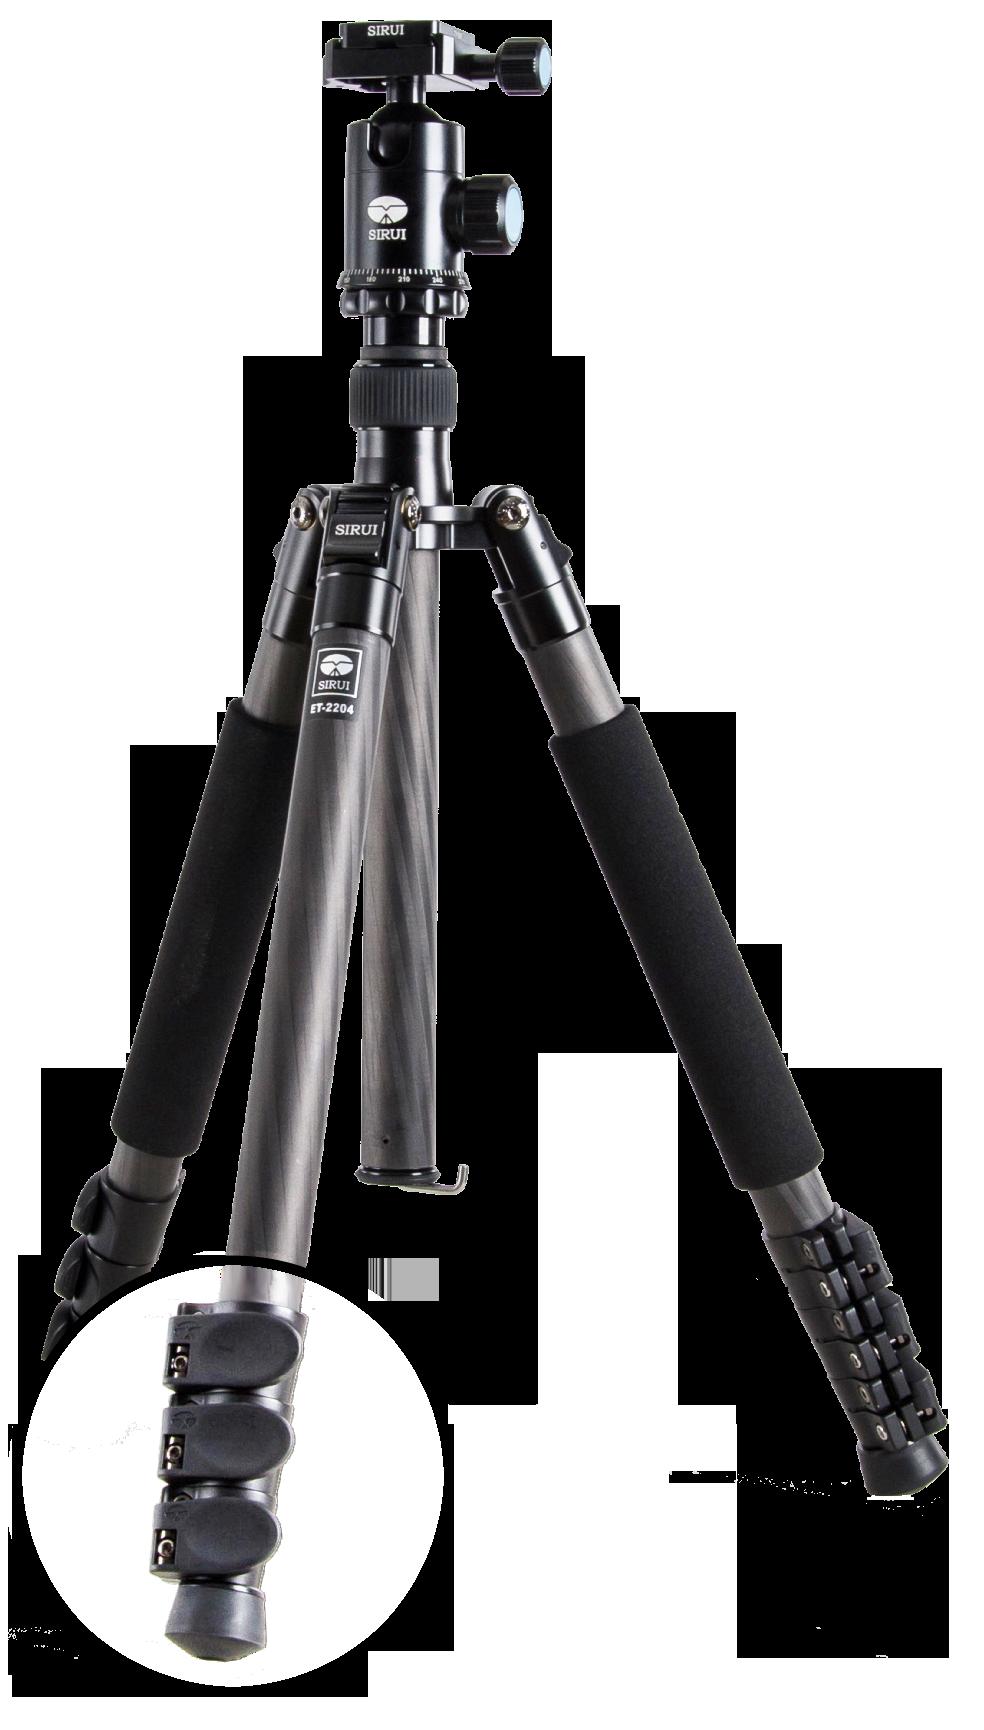 3 SIRUI ET SERIES PROFESSIONAL TRIPOD KITS The ideal combination for the budget conscious photographer ET If you re a photographer on a budget, but refuse to compromise on quality, the new SIRUI ET